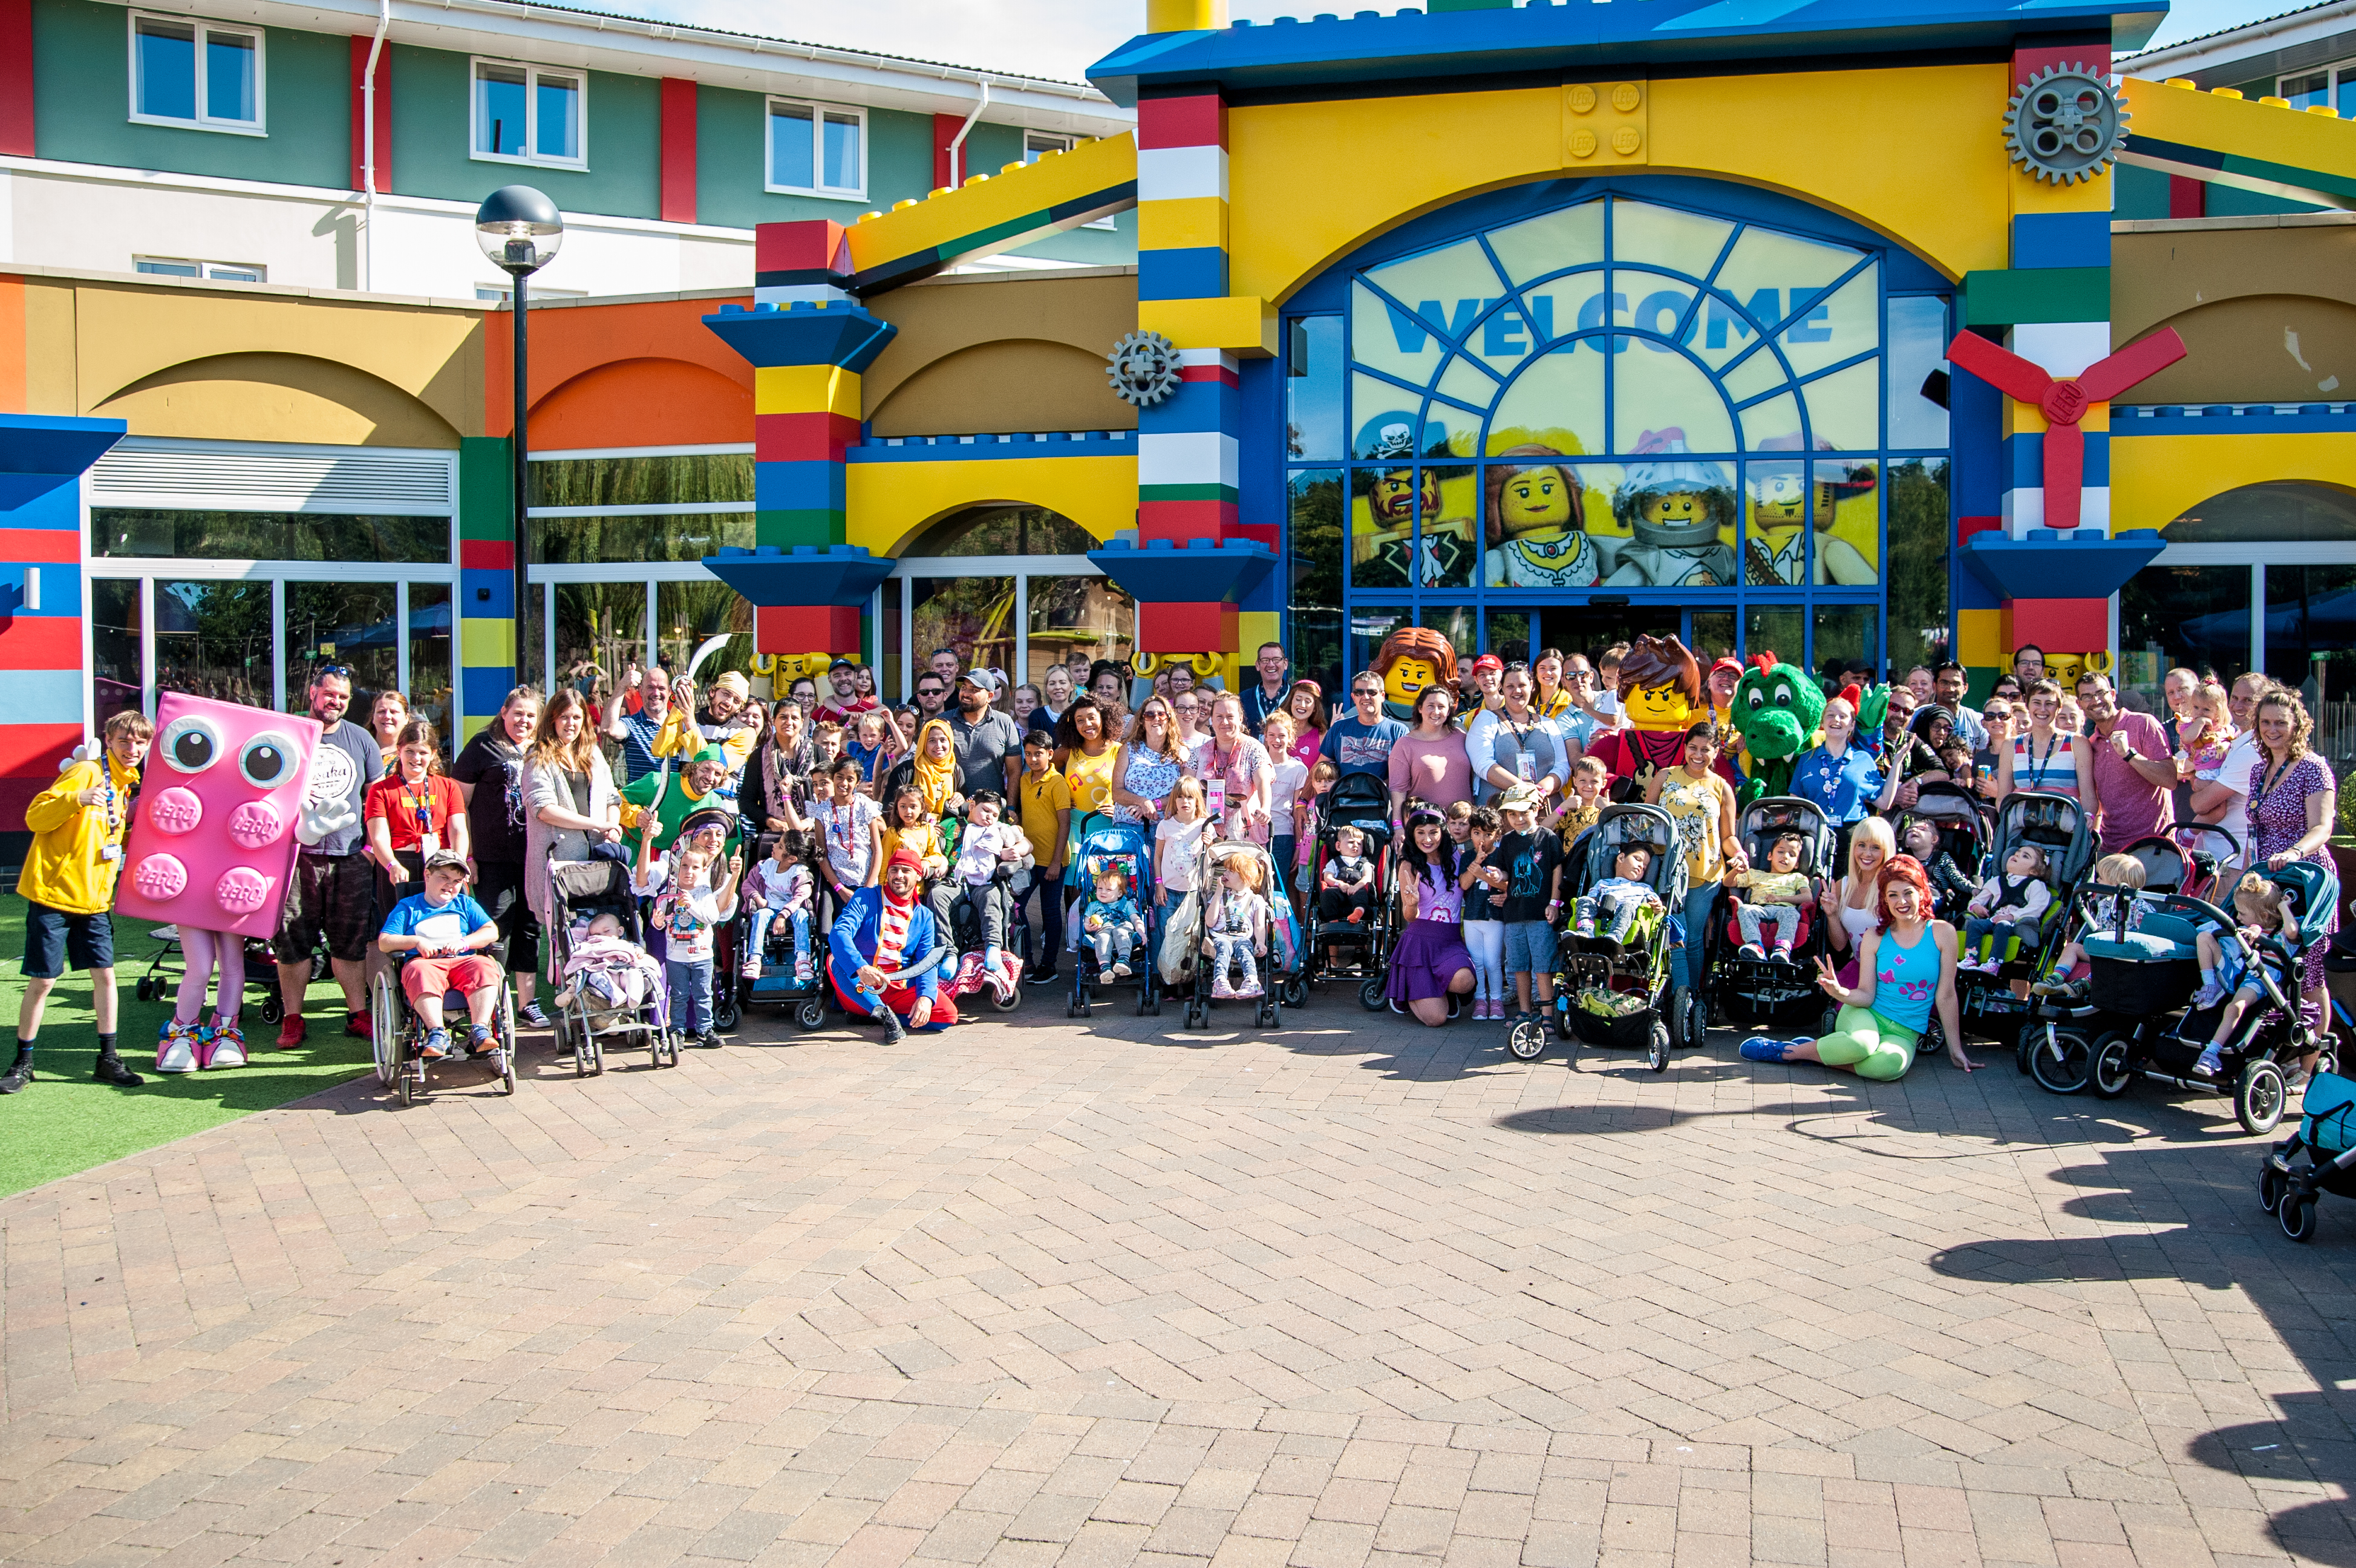 Guests attending the Merlin's Magic Wand Fun Festival at the LEGOLAND Windsor Resort